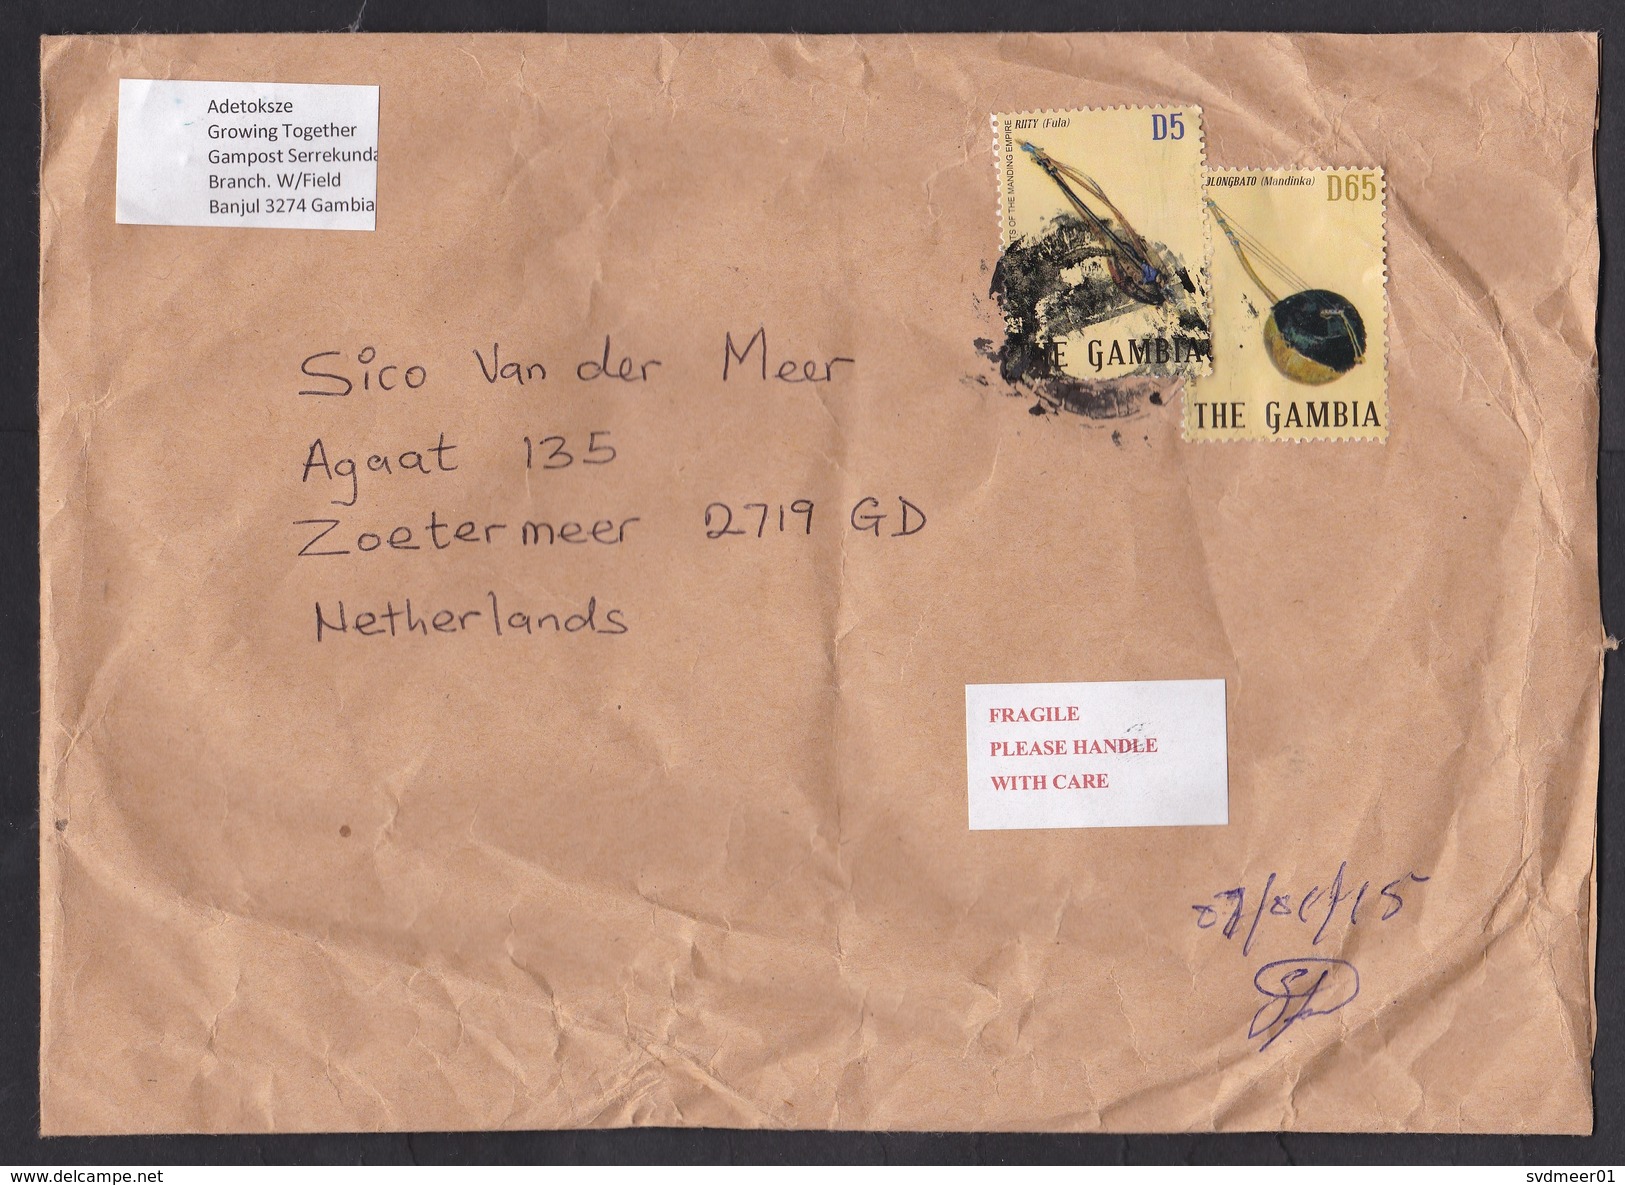 Gambia: Cover To Netherlands, 2015, 2 Stamps, String Instrument, Music, Heritage (damaged: Serious Creases) - Gambia (1965-...)